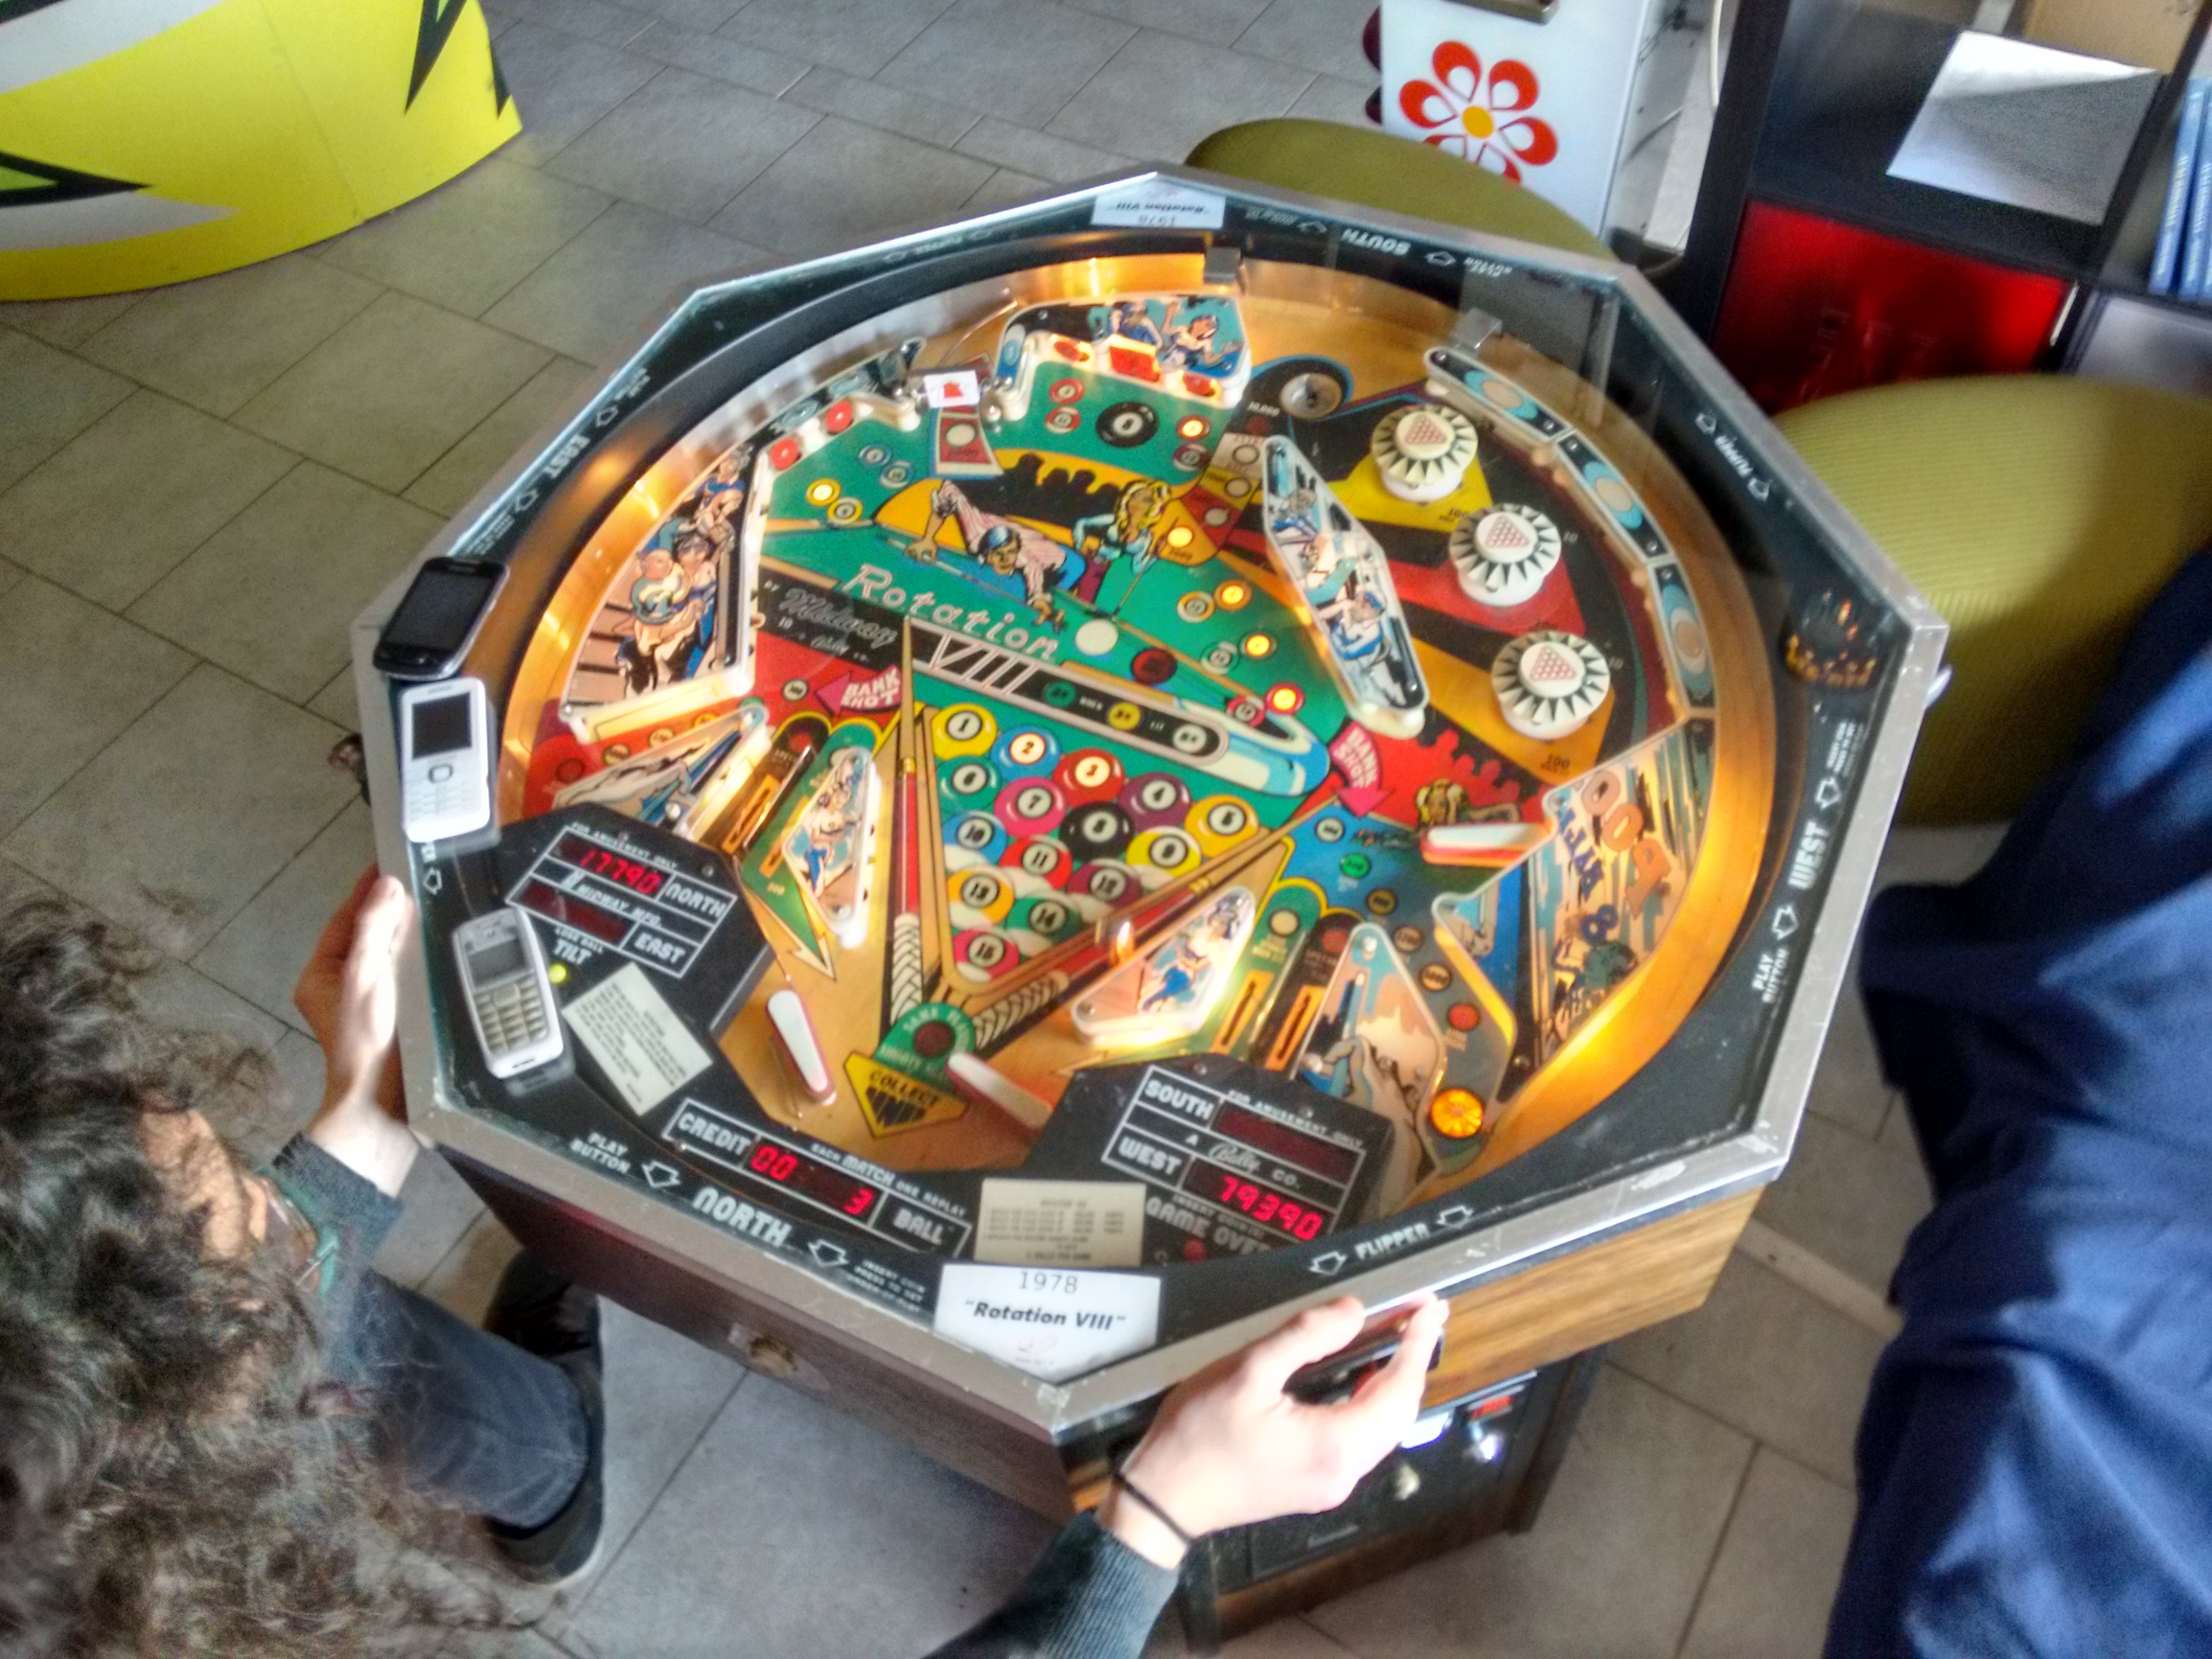 THIS WEEK IN PINBALL: February 4th, 2019 - This Week in Pinball